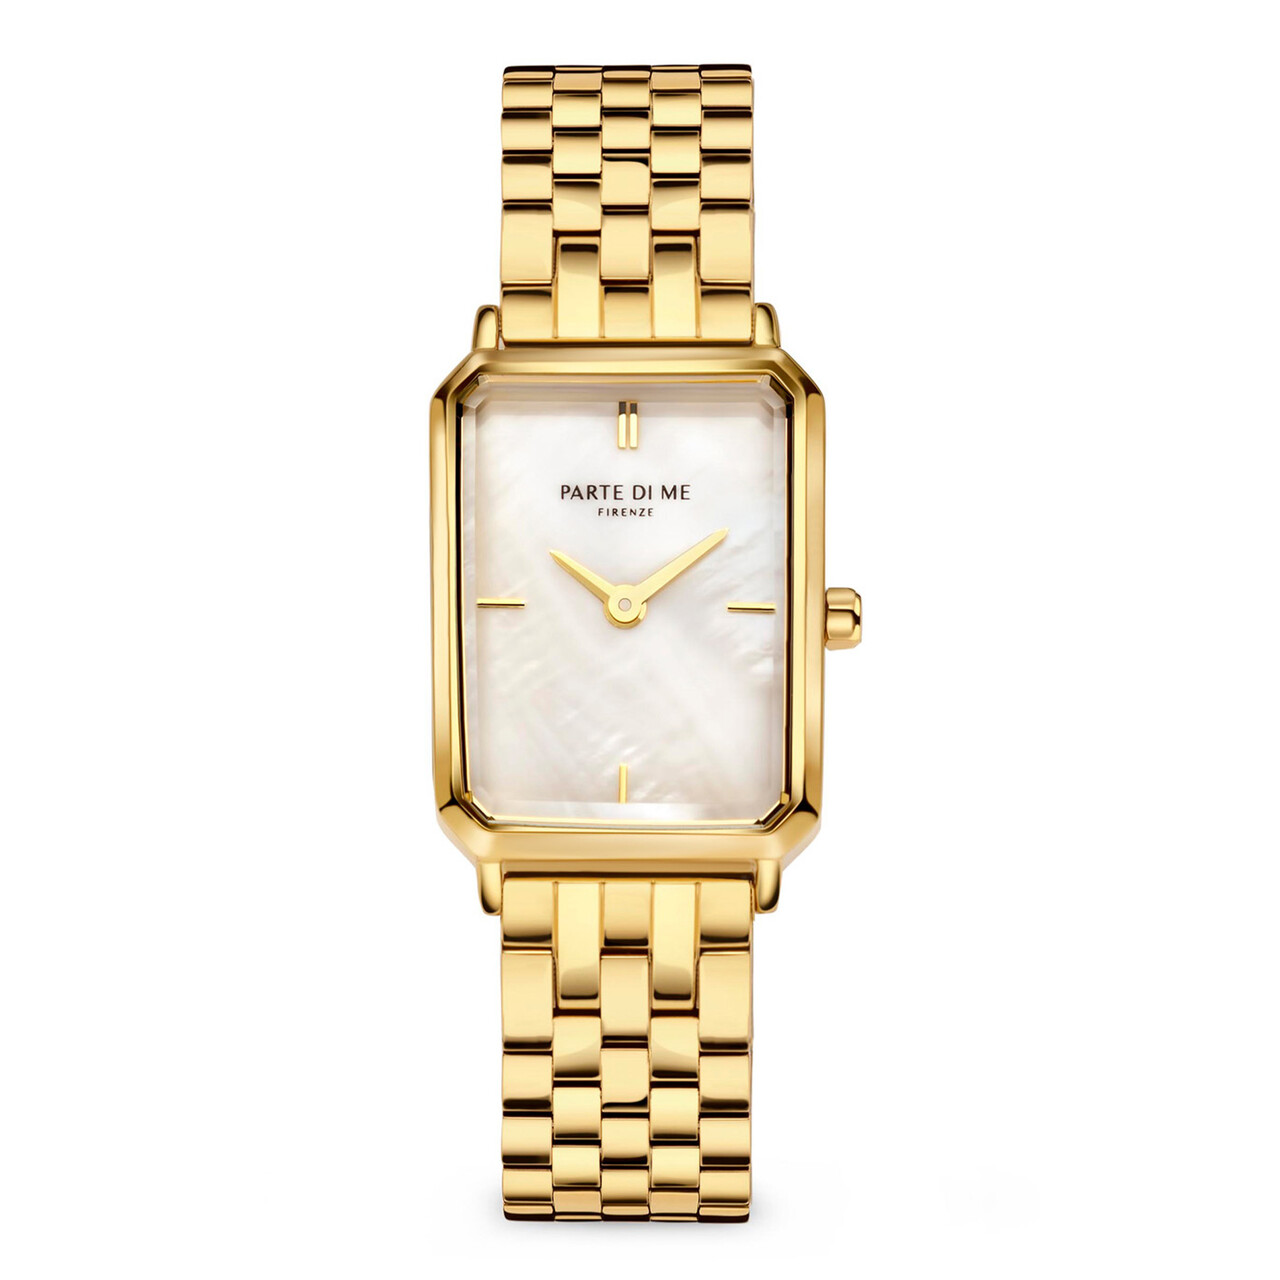 Buy STIGOR Classic White Gold Stainless Steel Analog Watch - Limited  Edition Premium Vintage-Inspired Watch for Women at Amazon.in